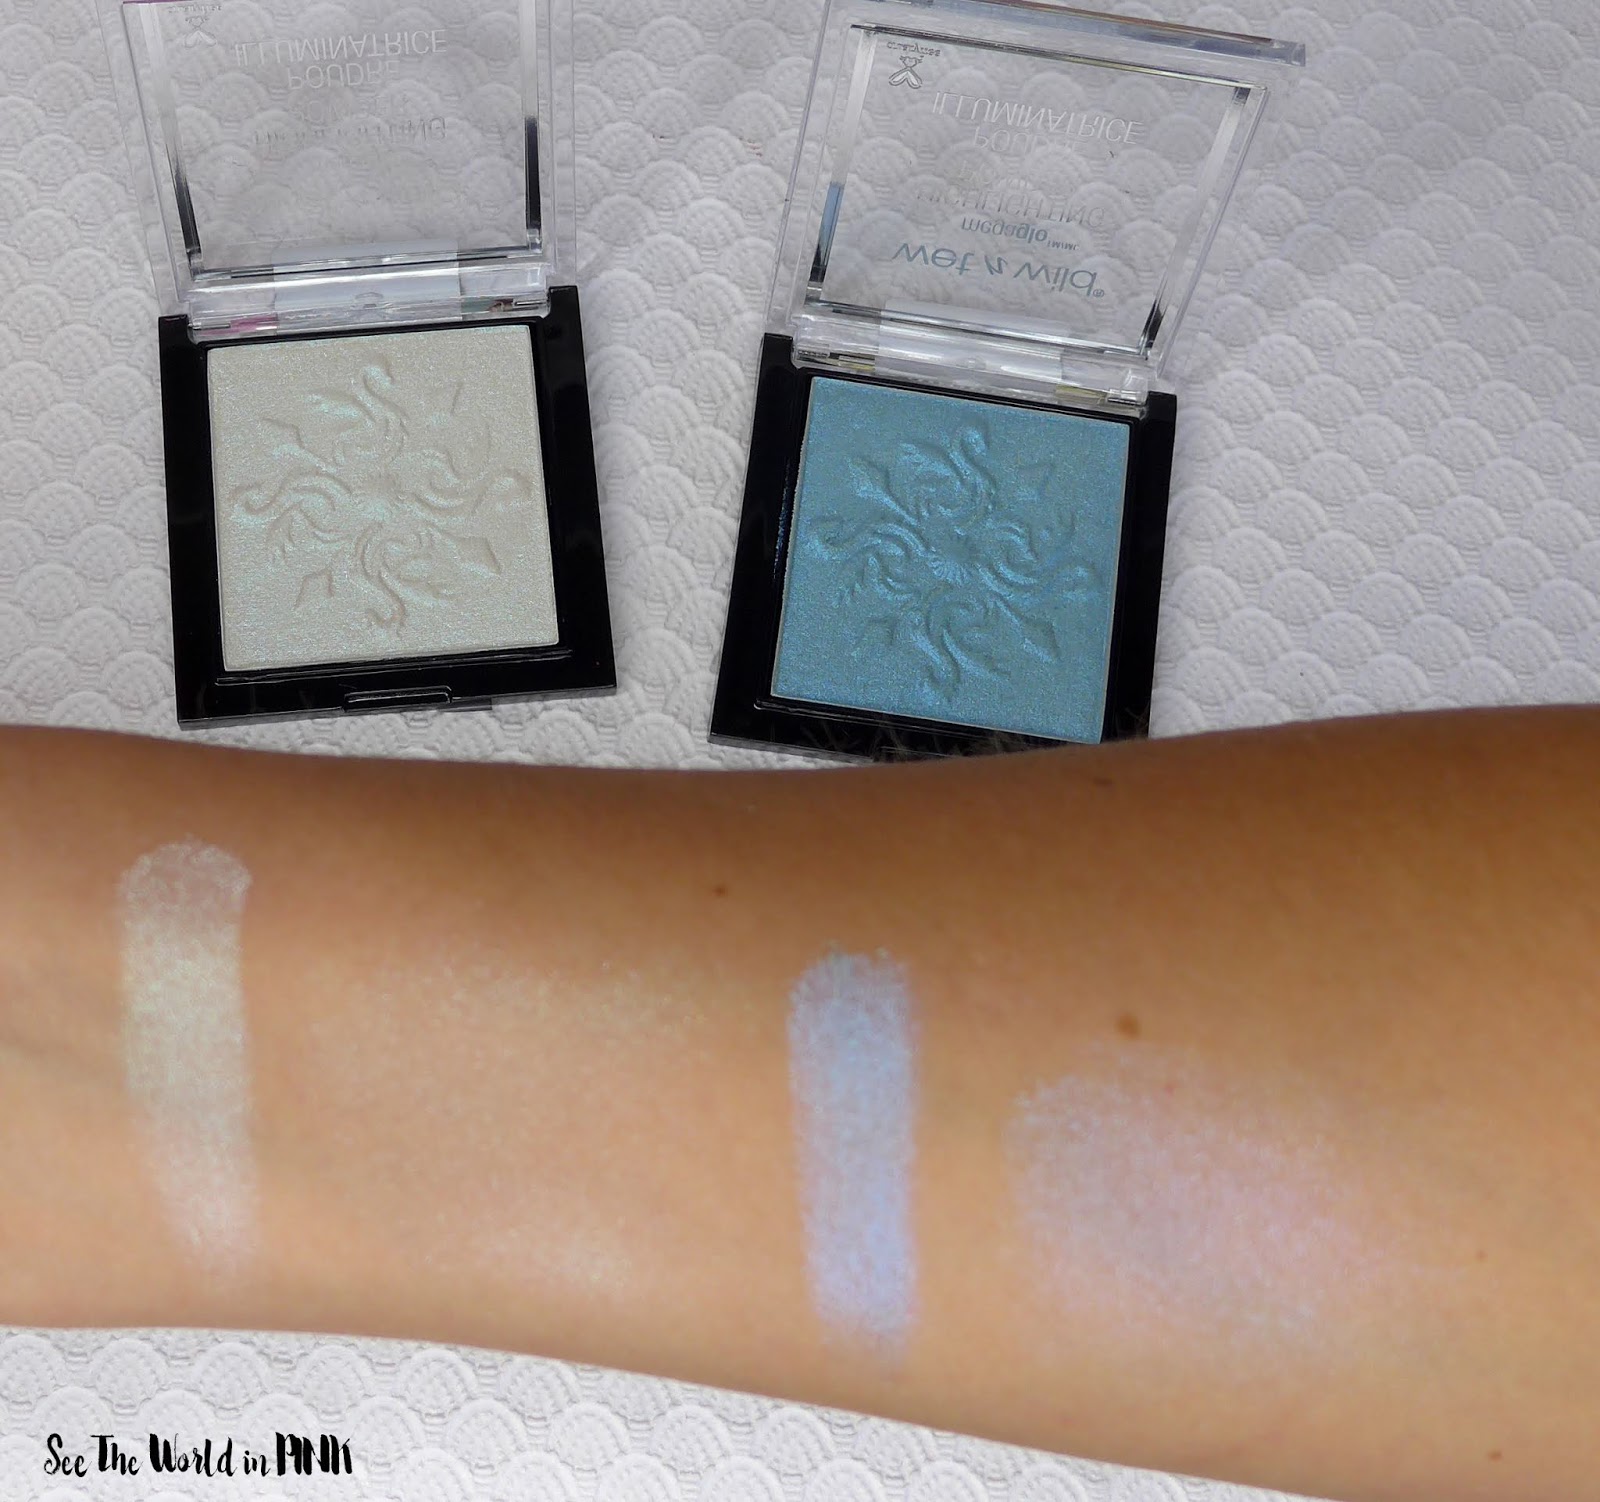 Wet N Wild Fire & Ice - Fire Dragon vs. Ice Dragon Makeup Looks, Swatches and Reviews